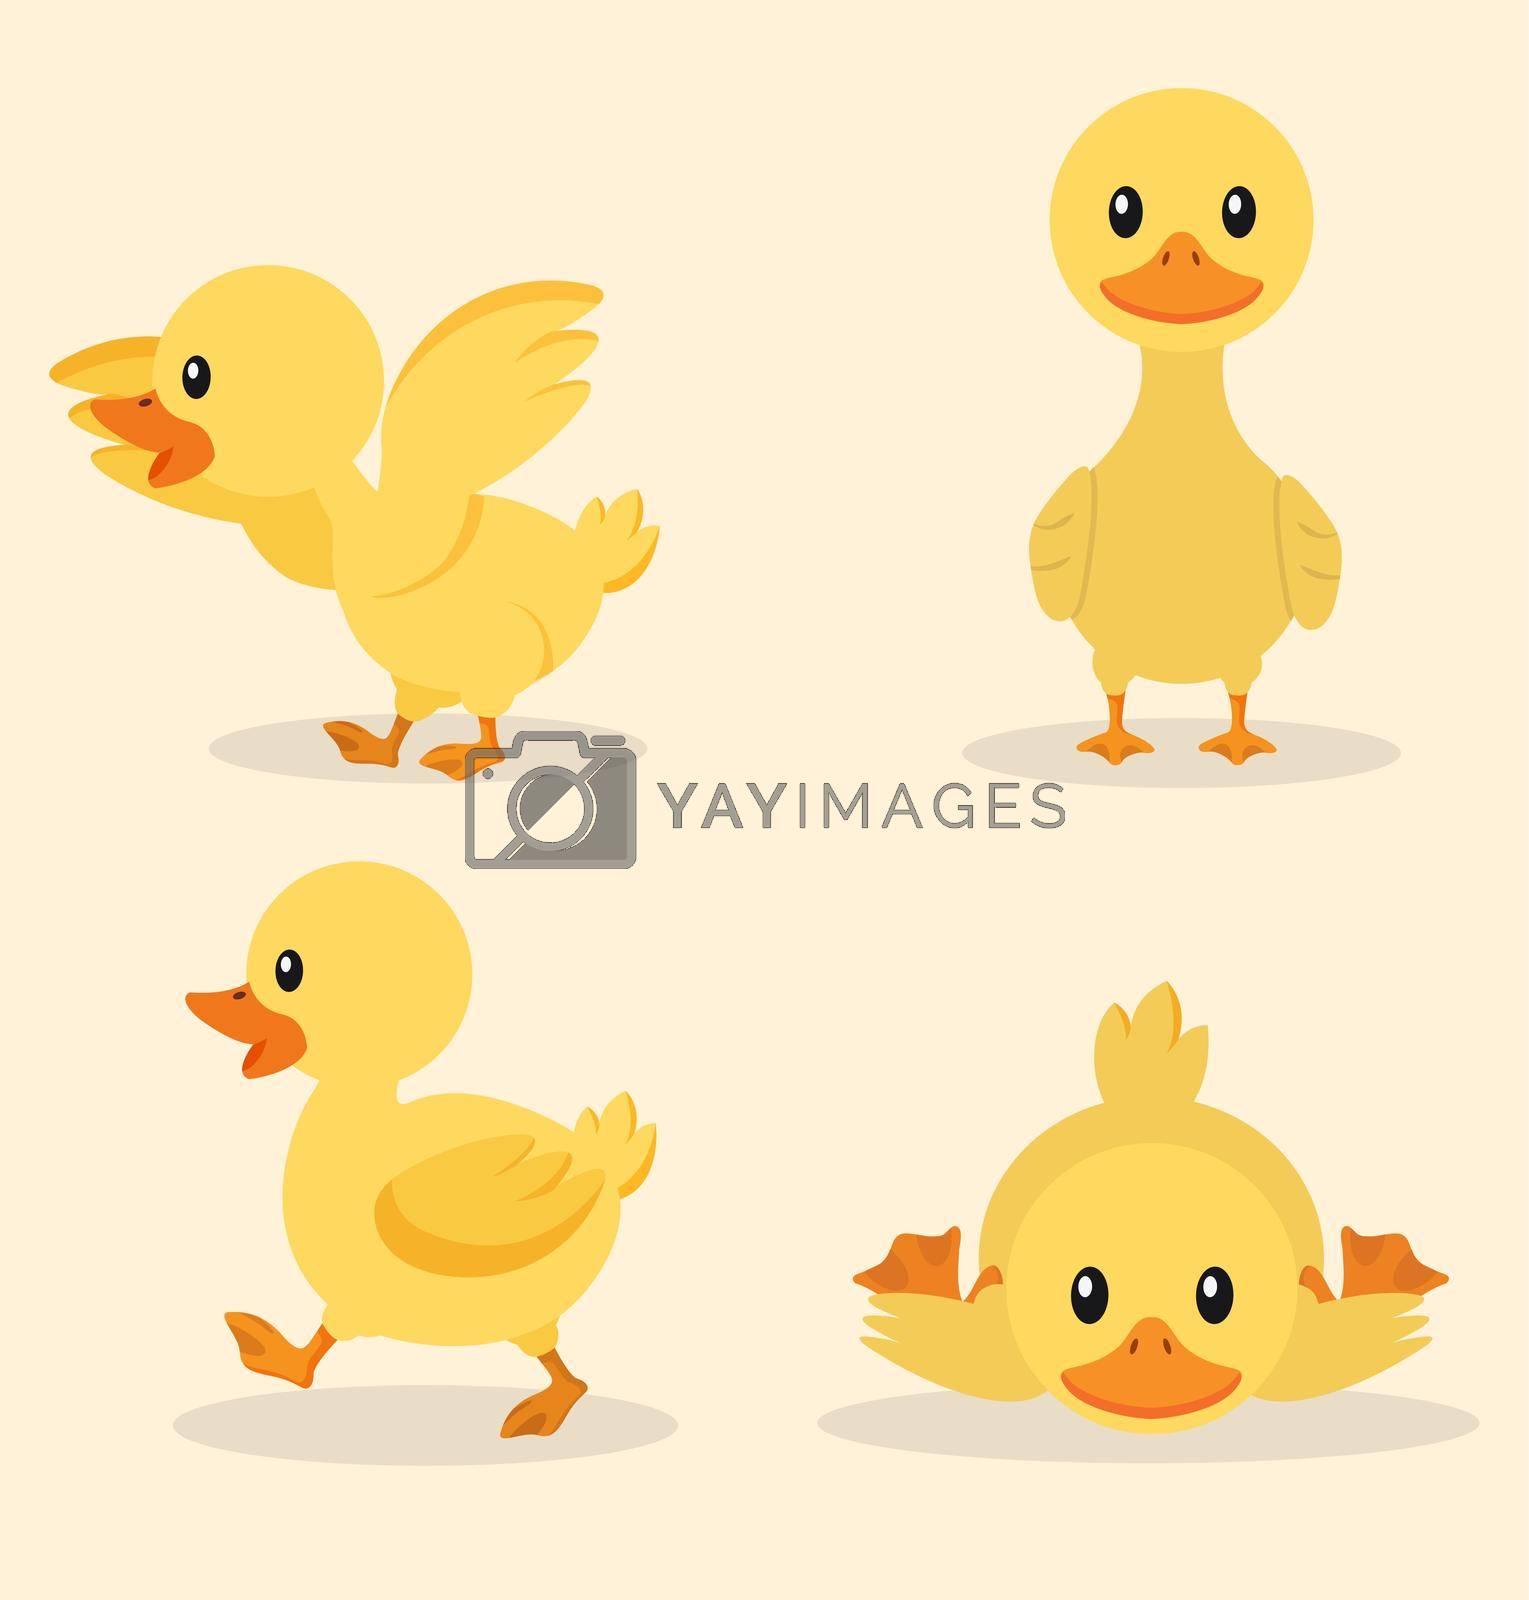 Royalty free image of Cute yellow duck collection set by focus_bell